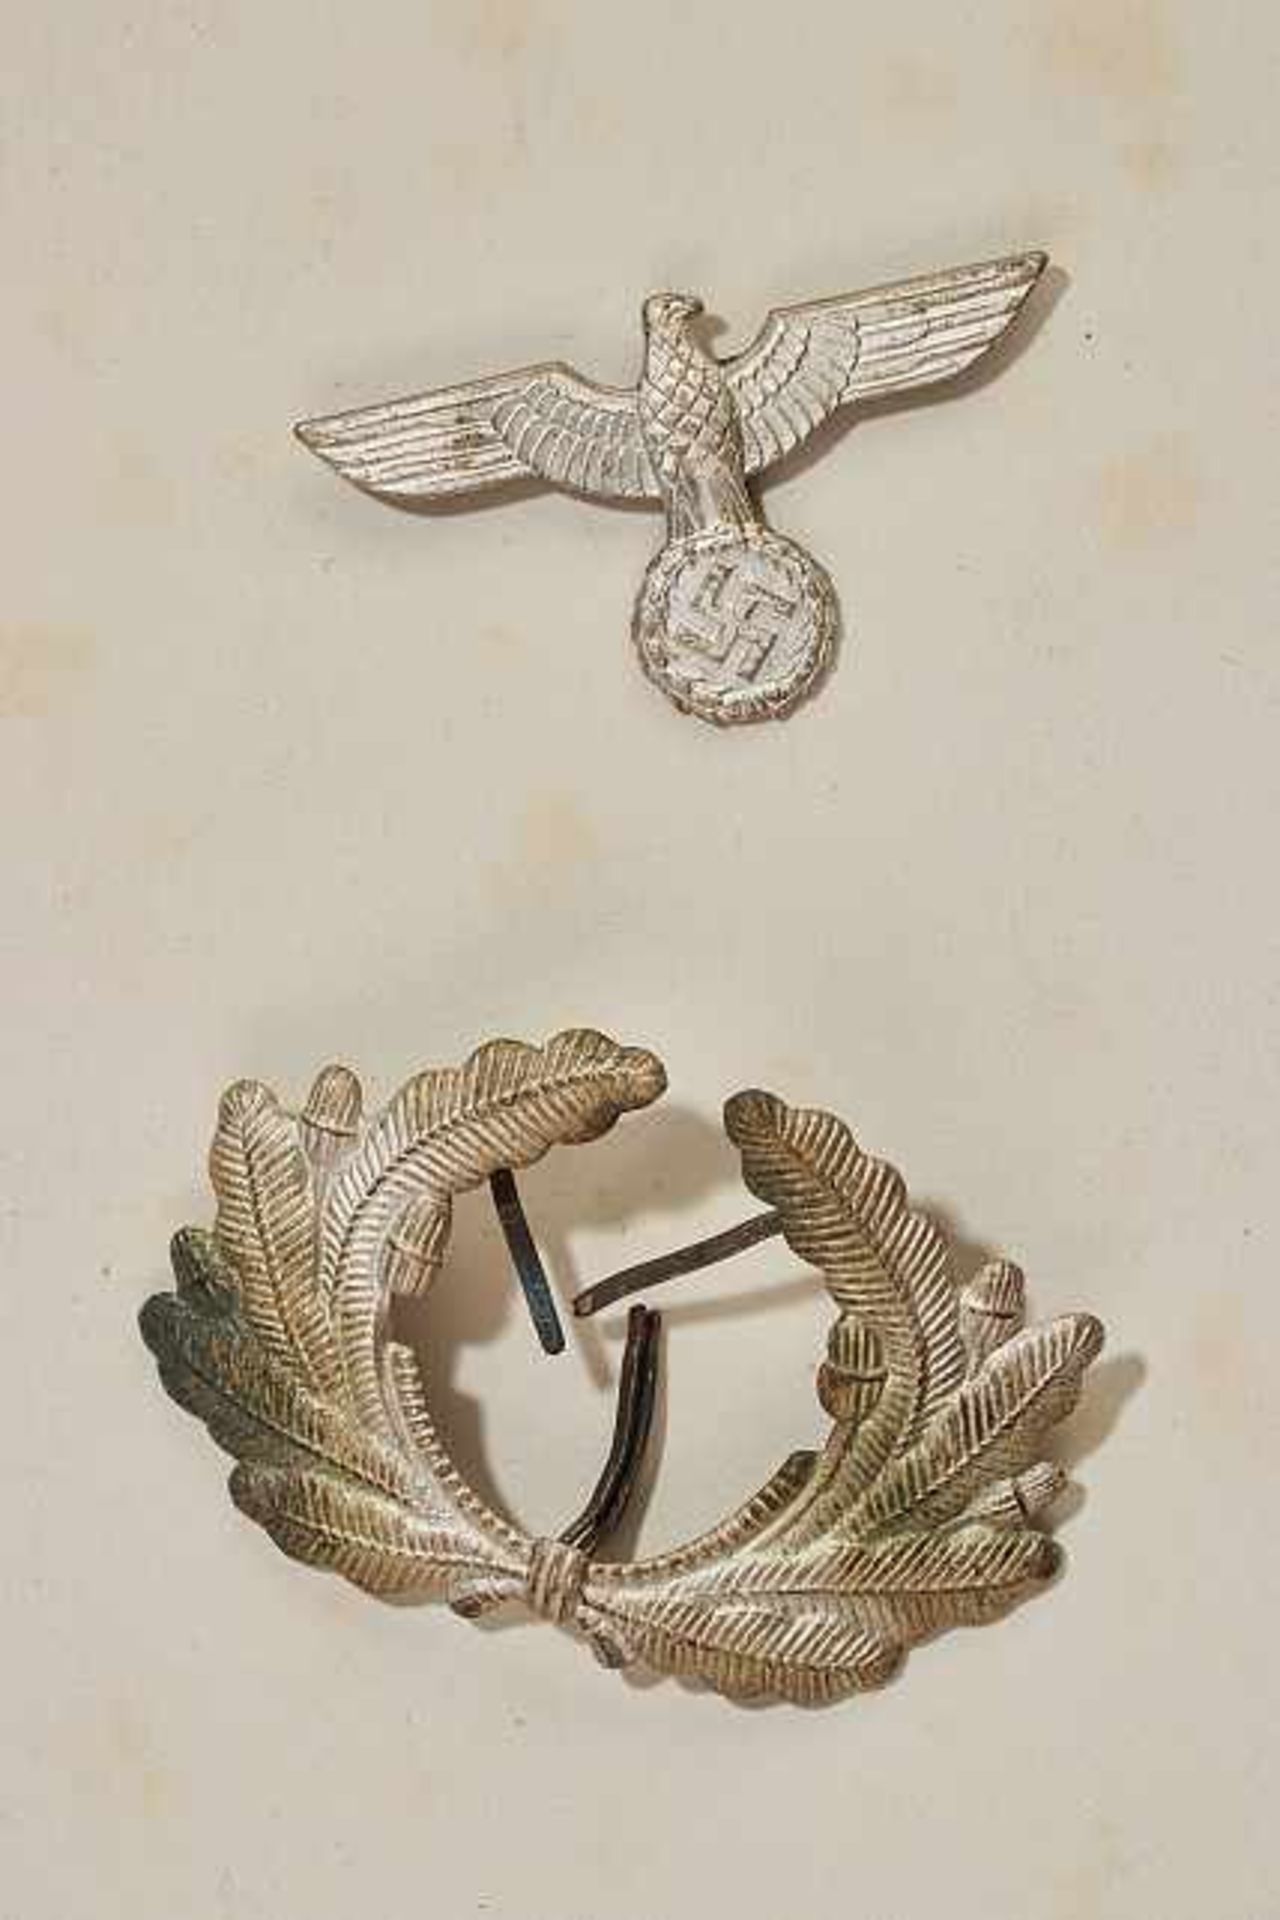 Deutsches Reich 1933 - 1945 - Heer - Uniformen : Army Officers Visor Insignia.Lot consists of an